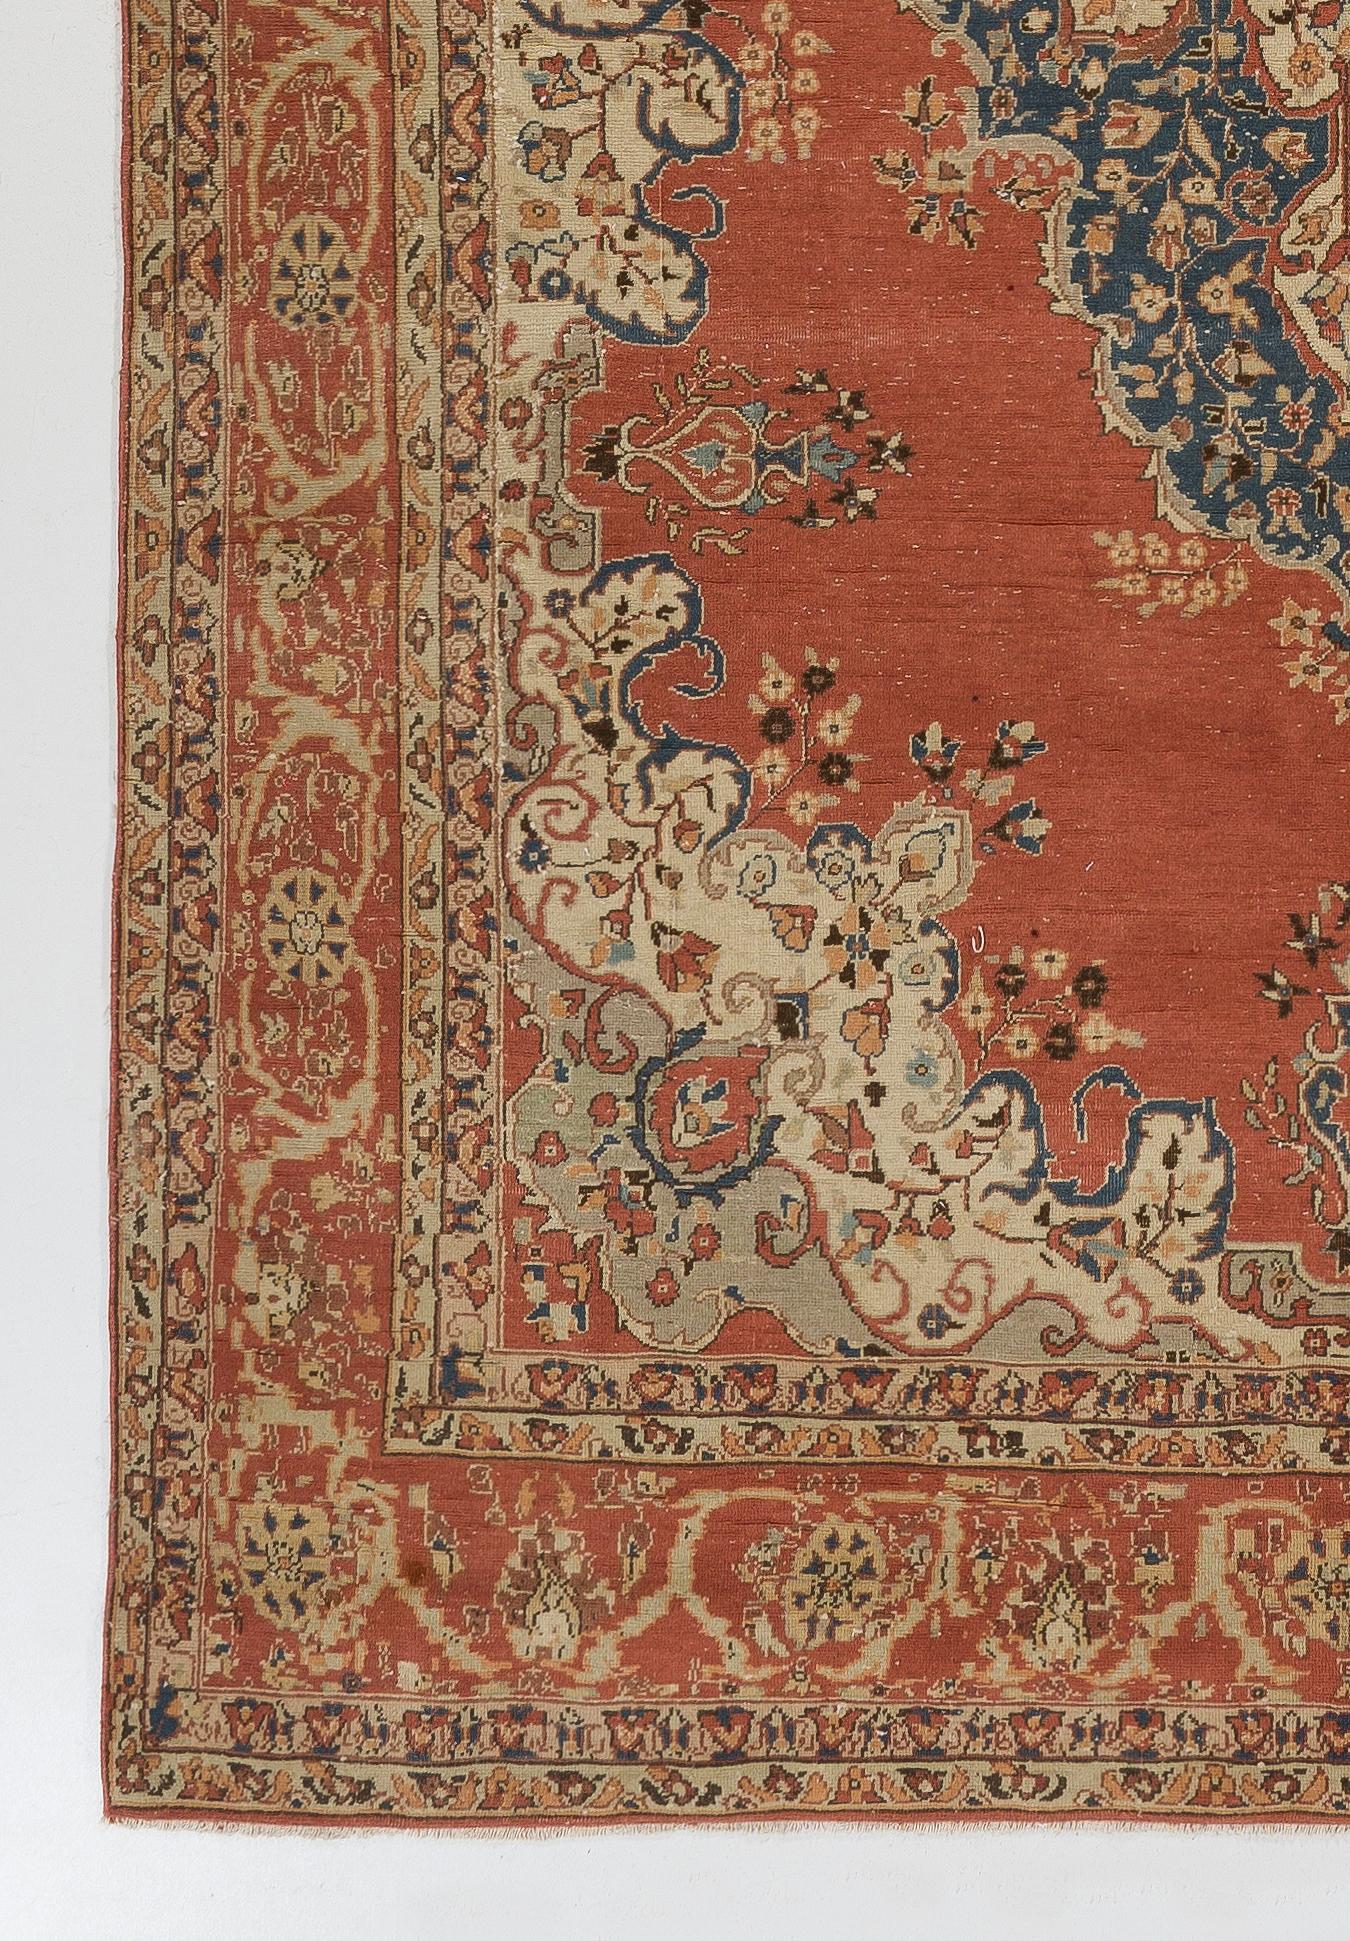 This vintage hand knotted Turkish rug features an elegant, classical medallion in dark indigo adorned with dainty floral motifs and scrolling vines against a vibrant, plain field in madder red, surrounded by curvilinear, floral corner pieces in